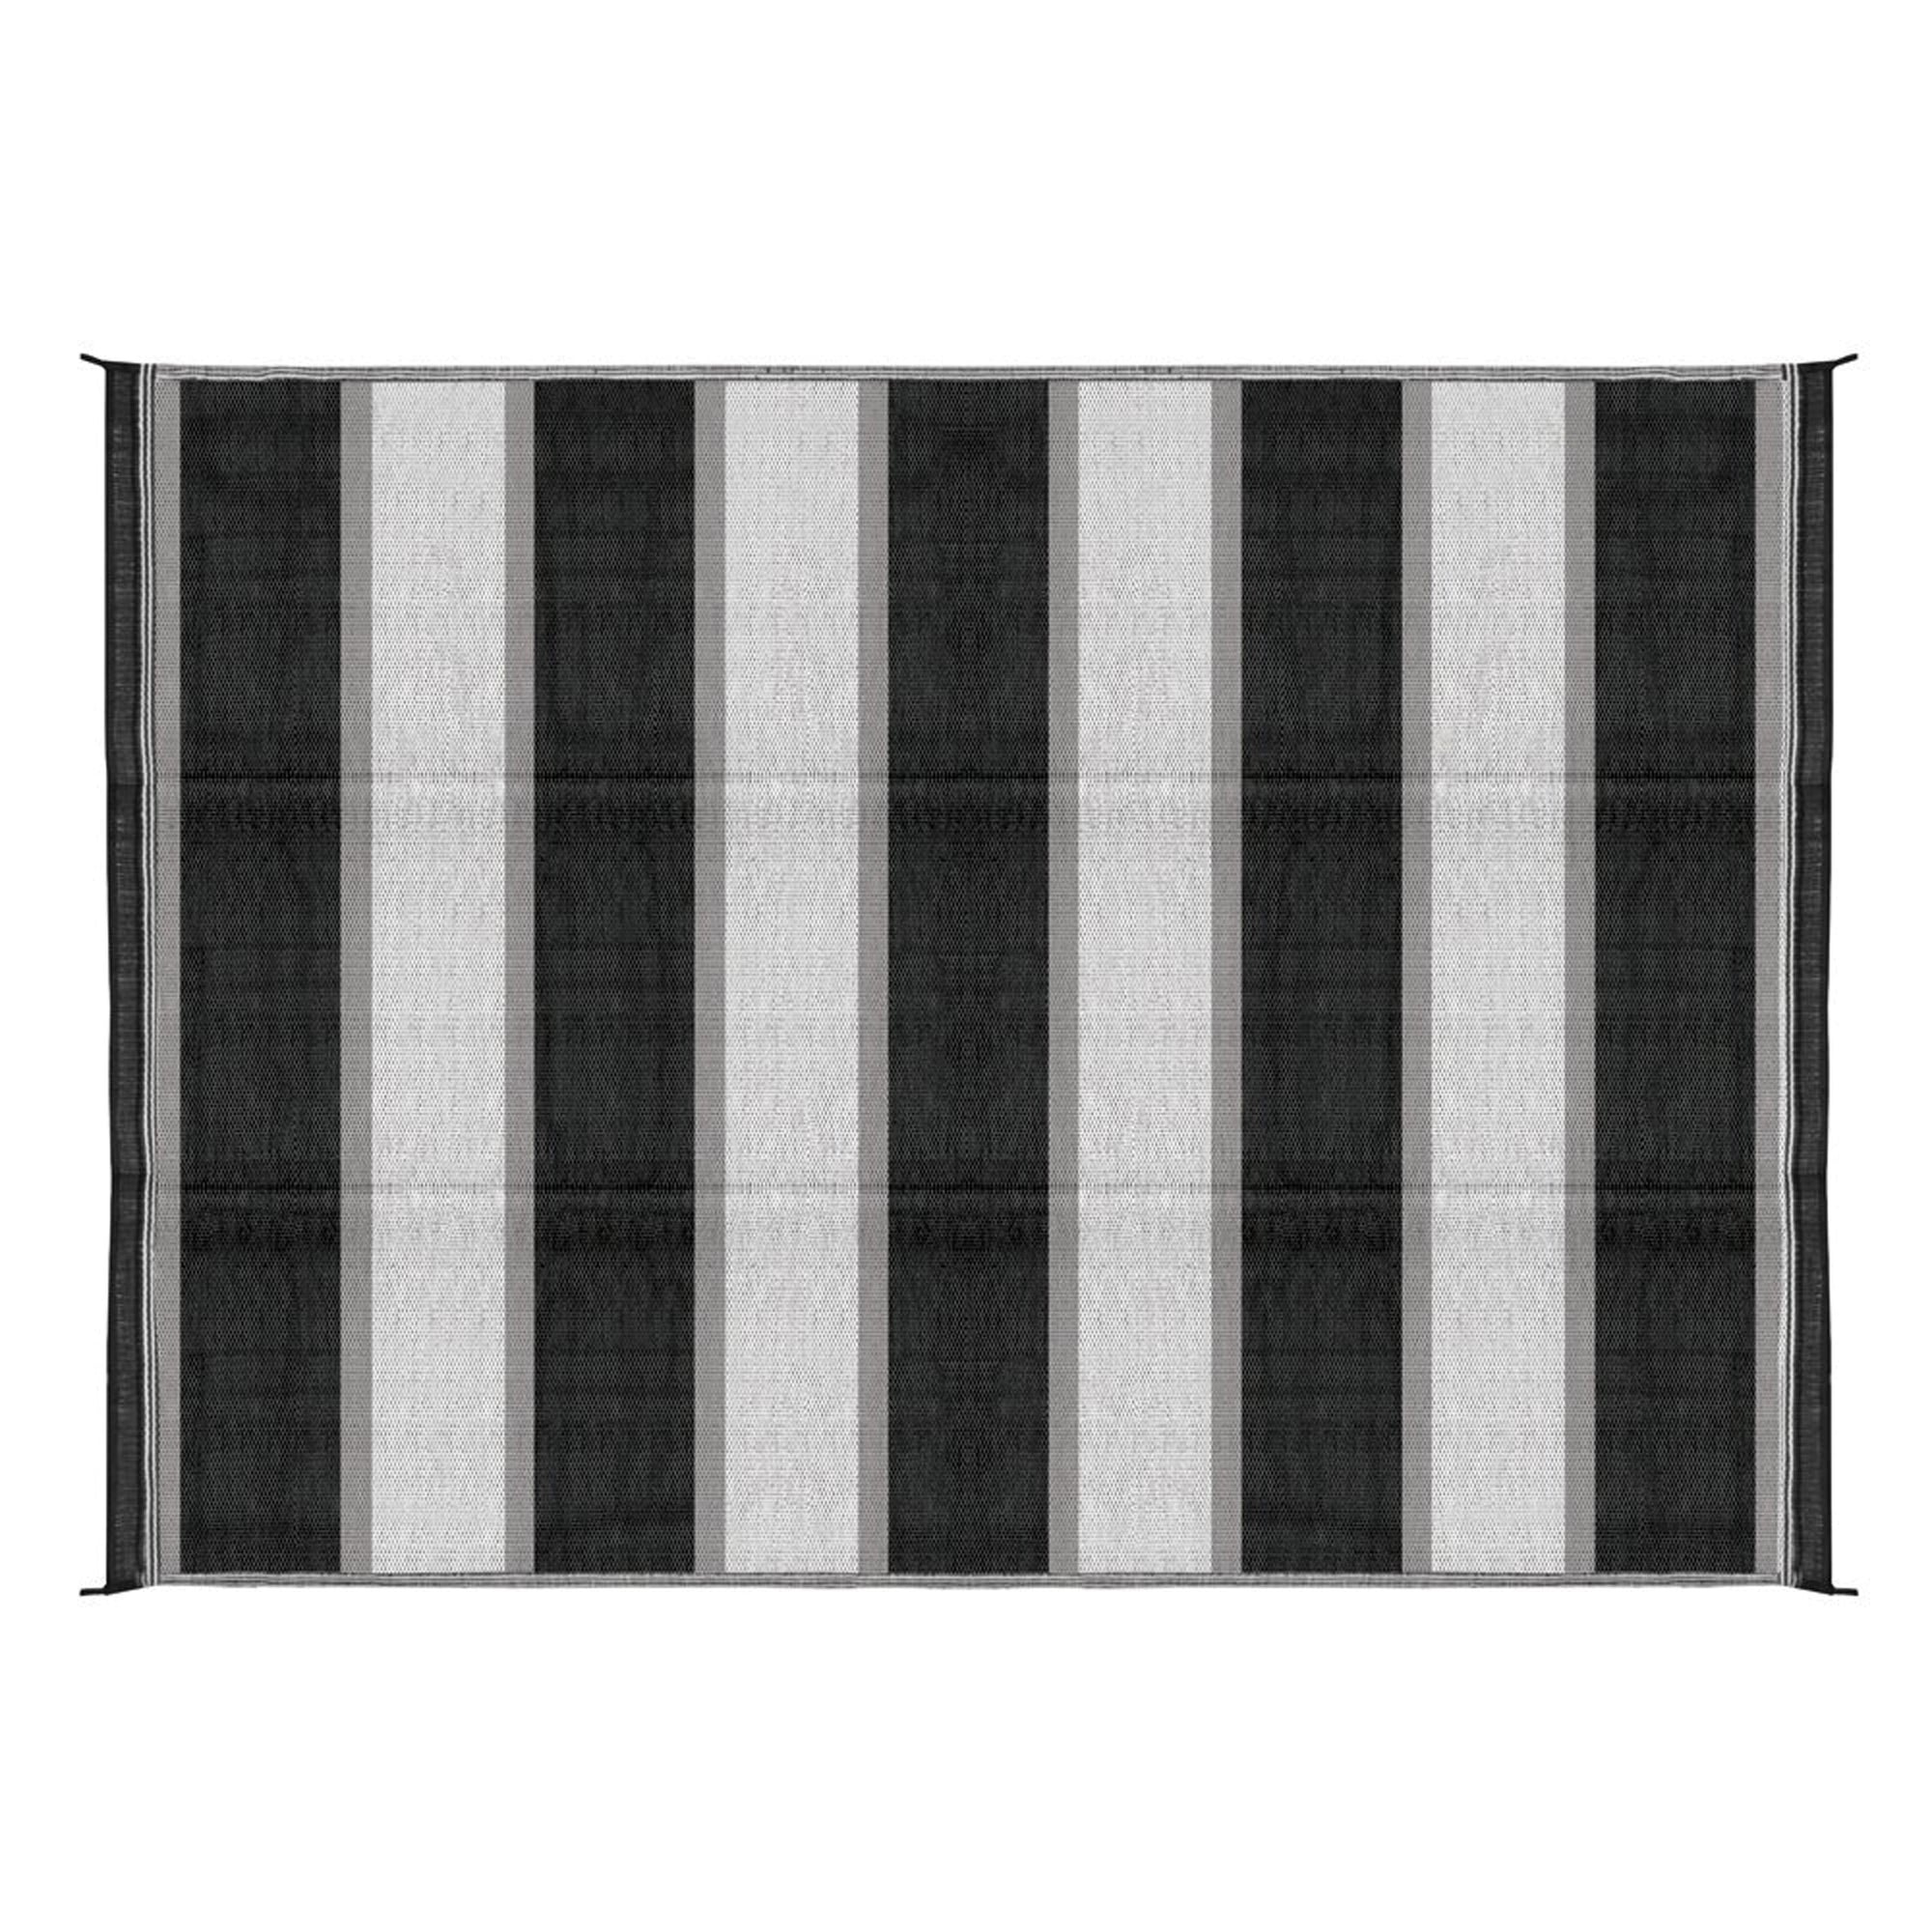 Camco 42873 Stripe Awning Leisure Mat - Charcoal Stripe 6' x 9'